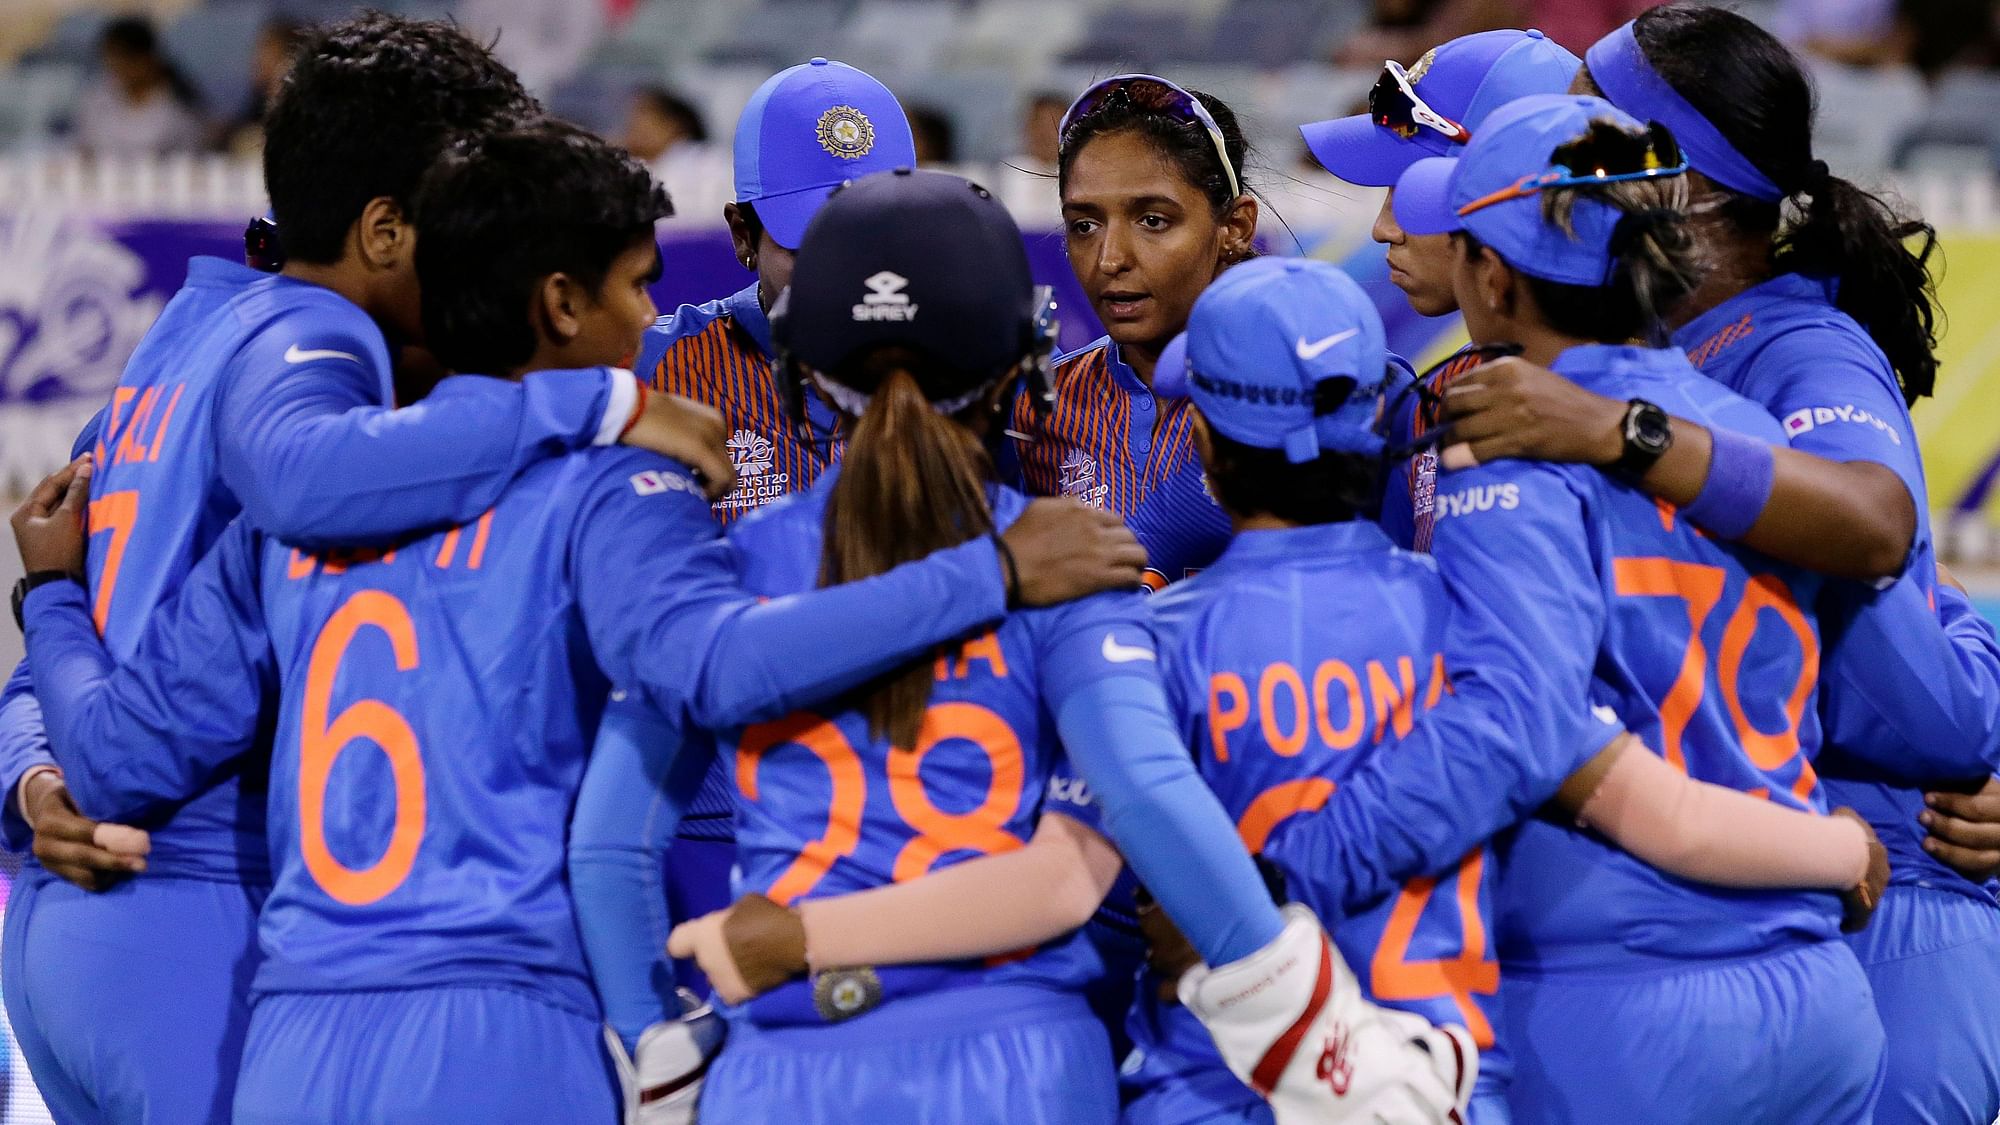 ICC Women's T20 World Cup Shafali, Poonam Guide India to 18Run Win vs